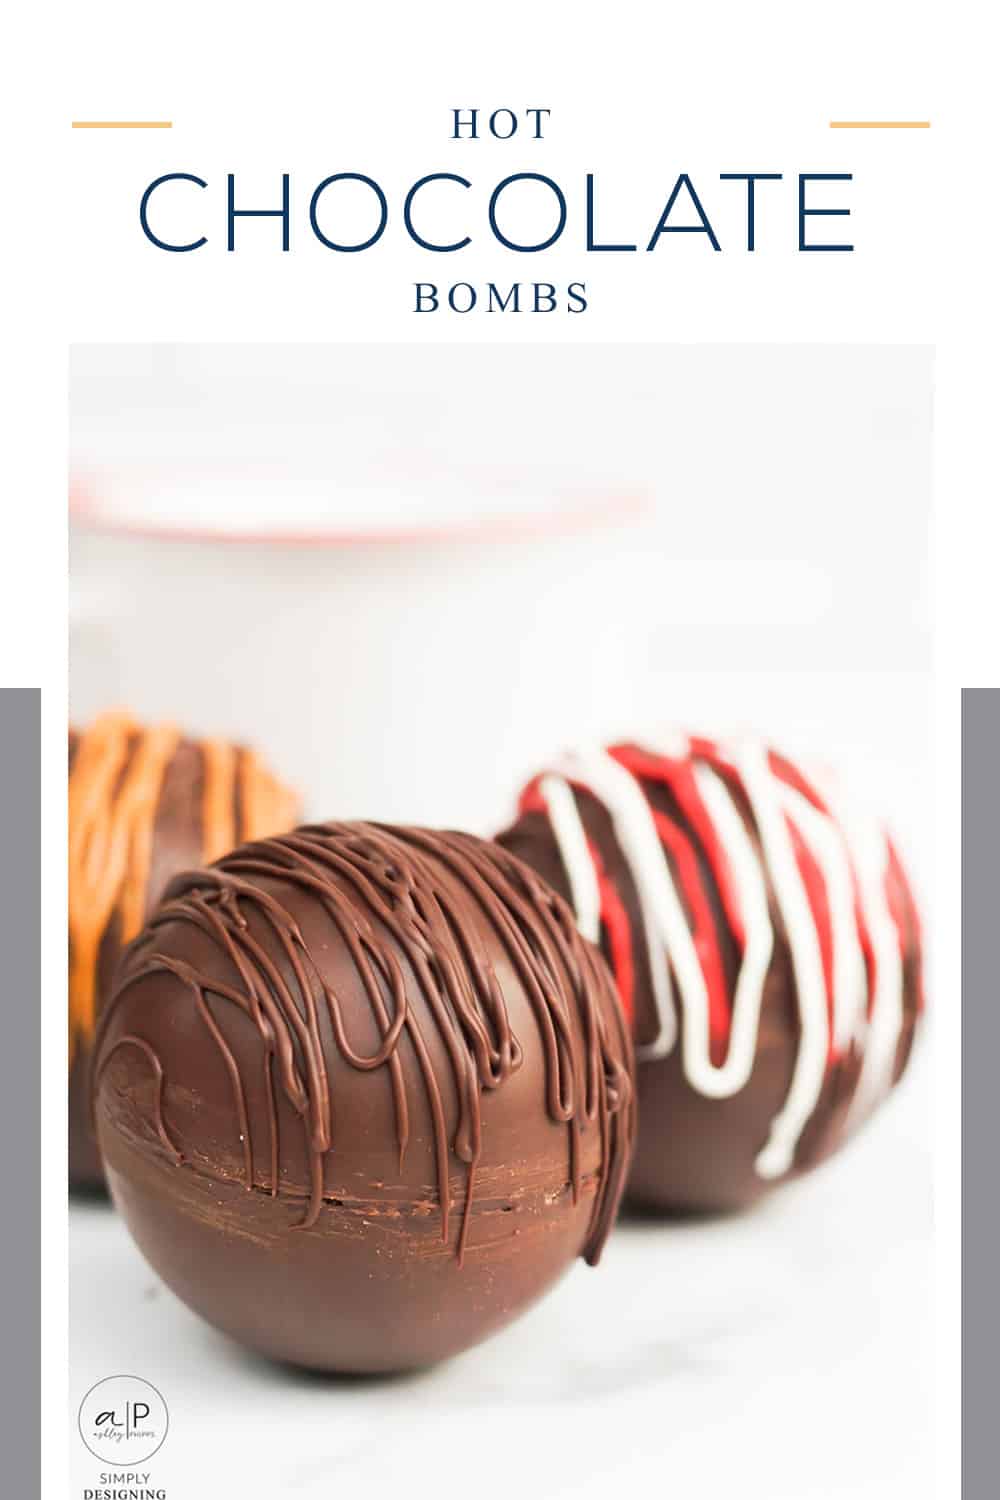 This Hot Chocolate Bomb is a delicious chocolate ball that explodes with marshmellows when put into hot milk for the most tasty hot chocolate ever